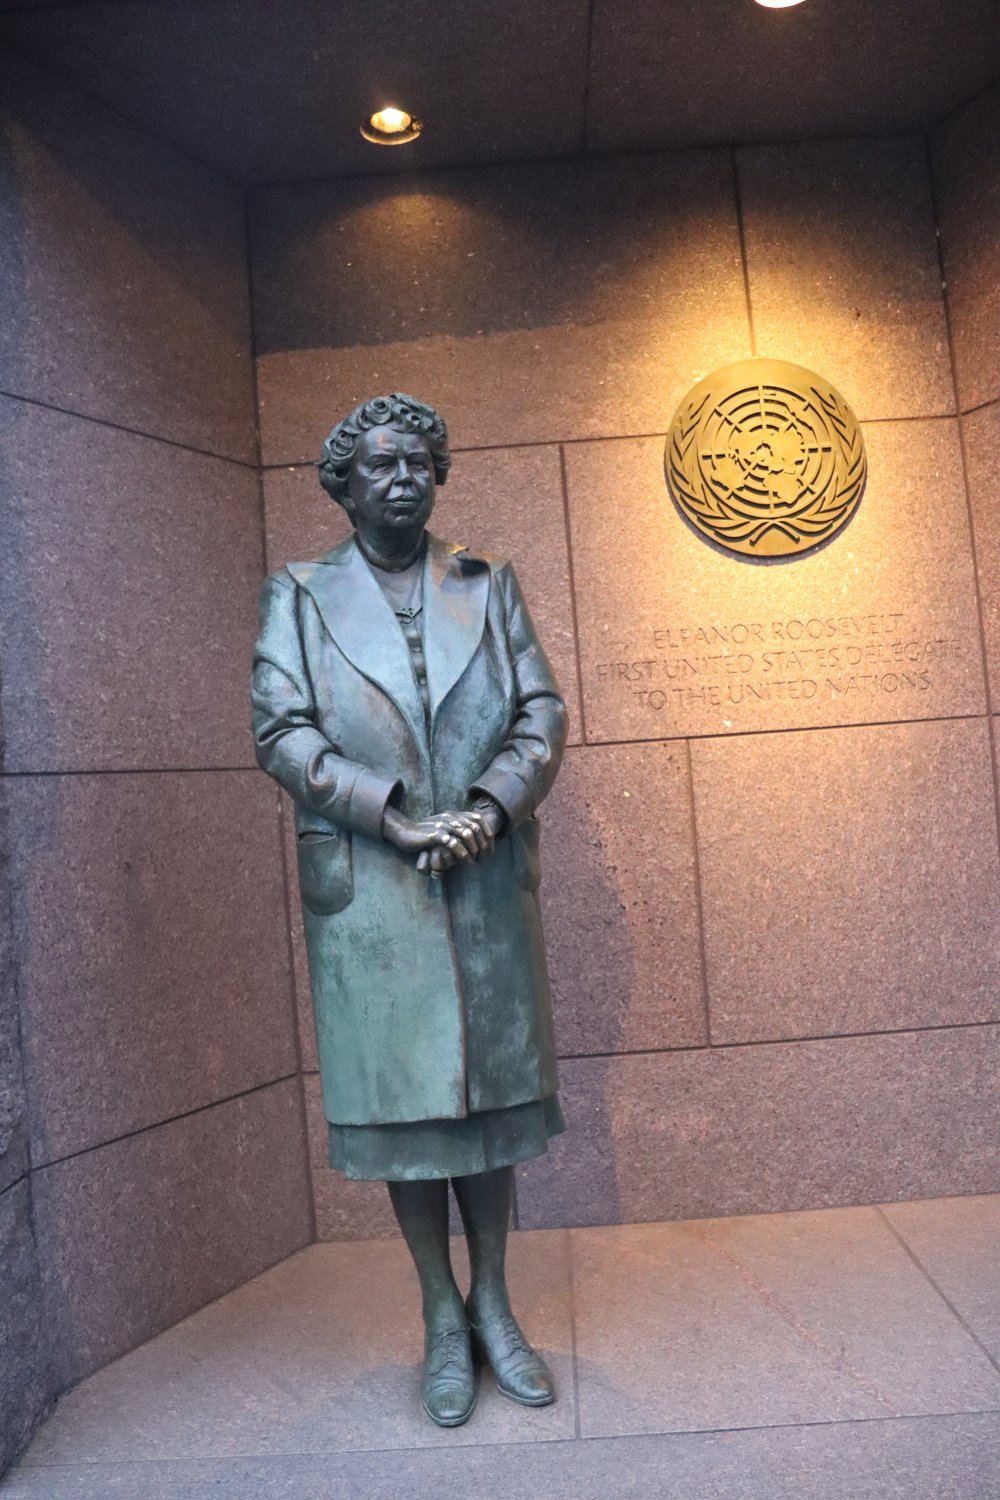 Another one of my heroes, Eleanor Roosevelt.